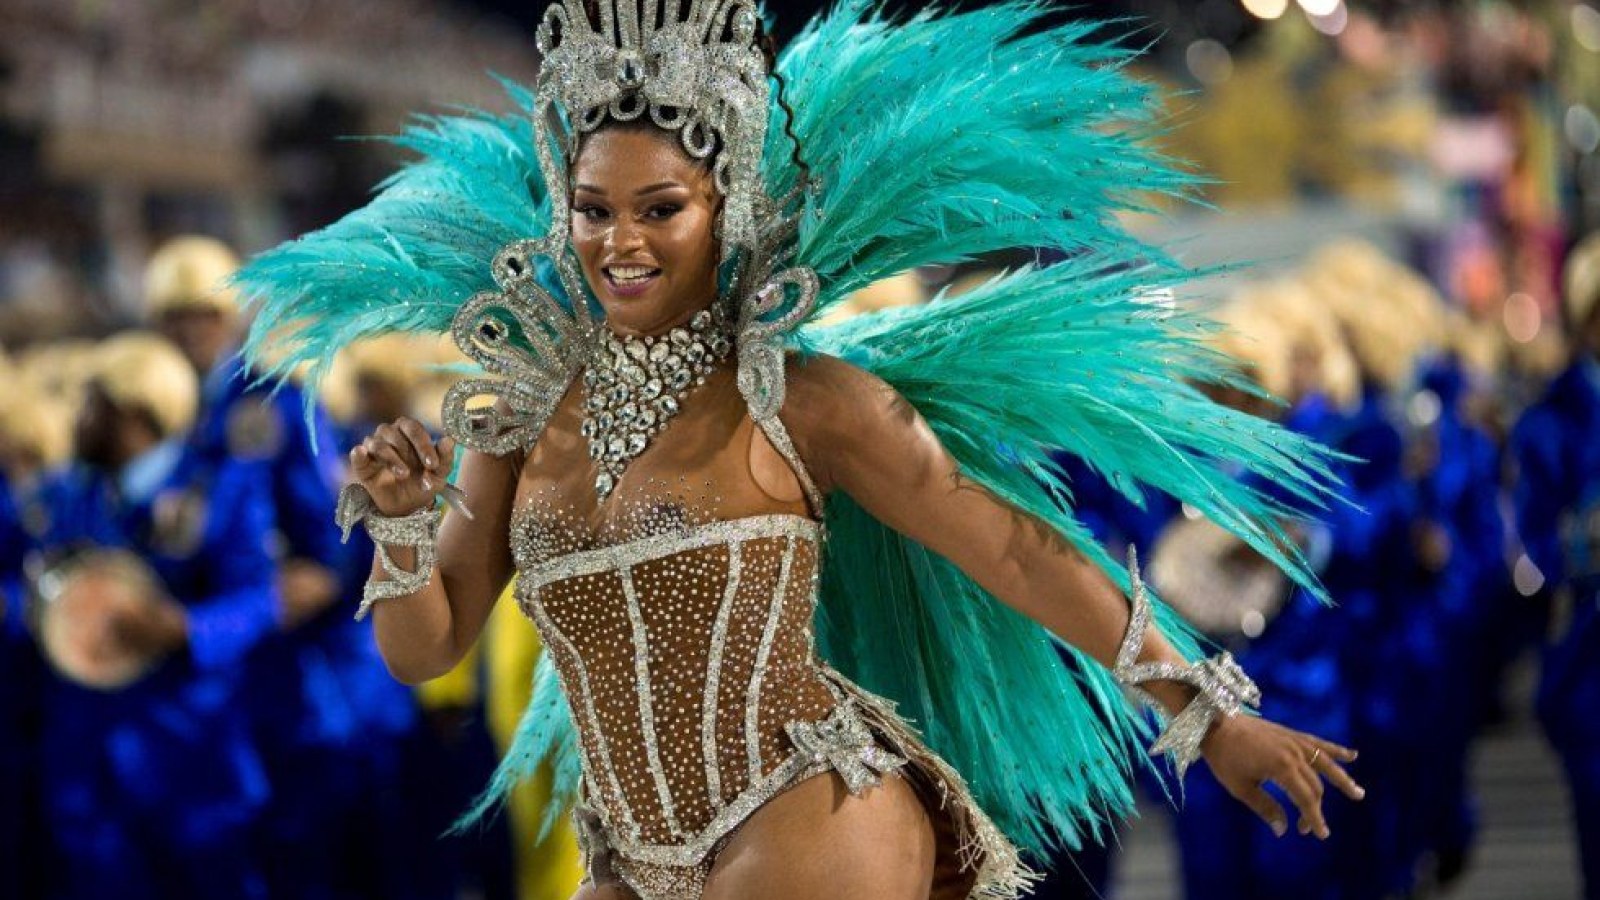 Rio Carnival 2018 night two: Glitzy parades tackle serious issues